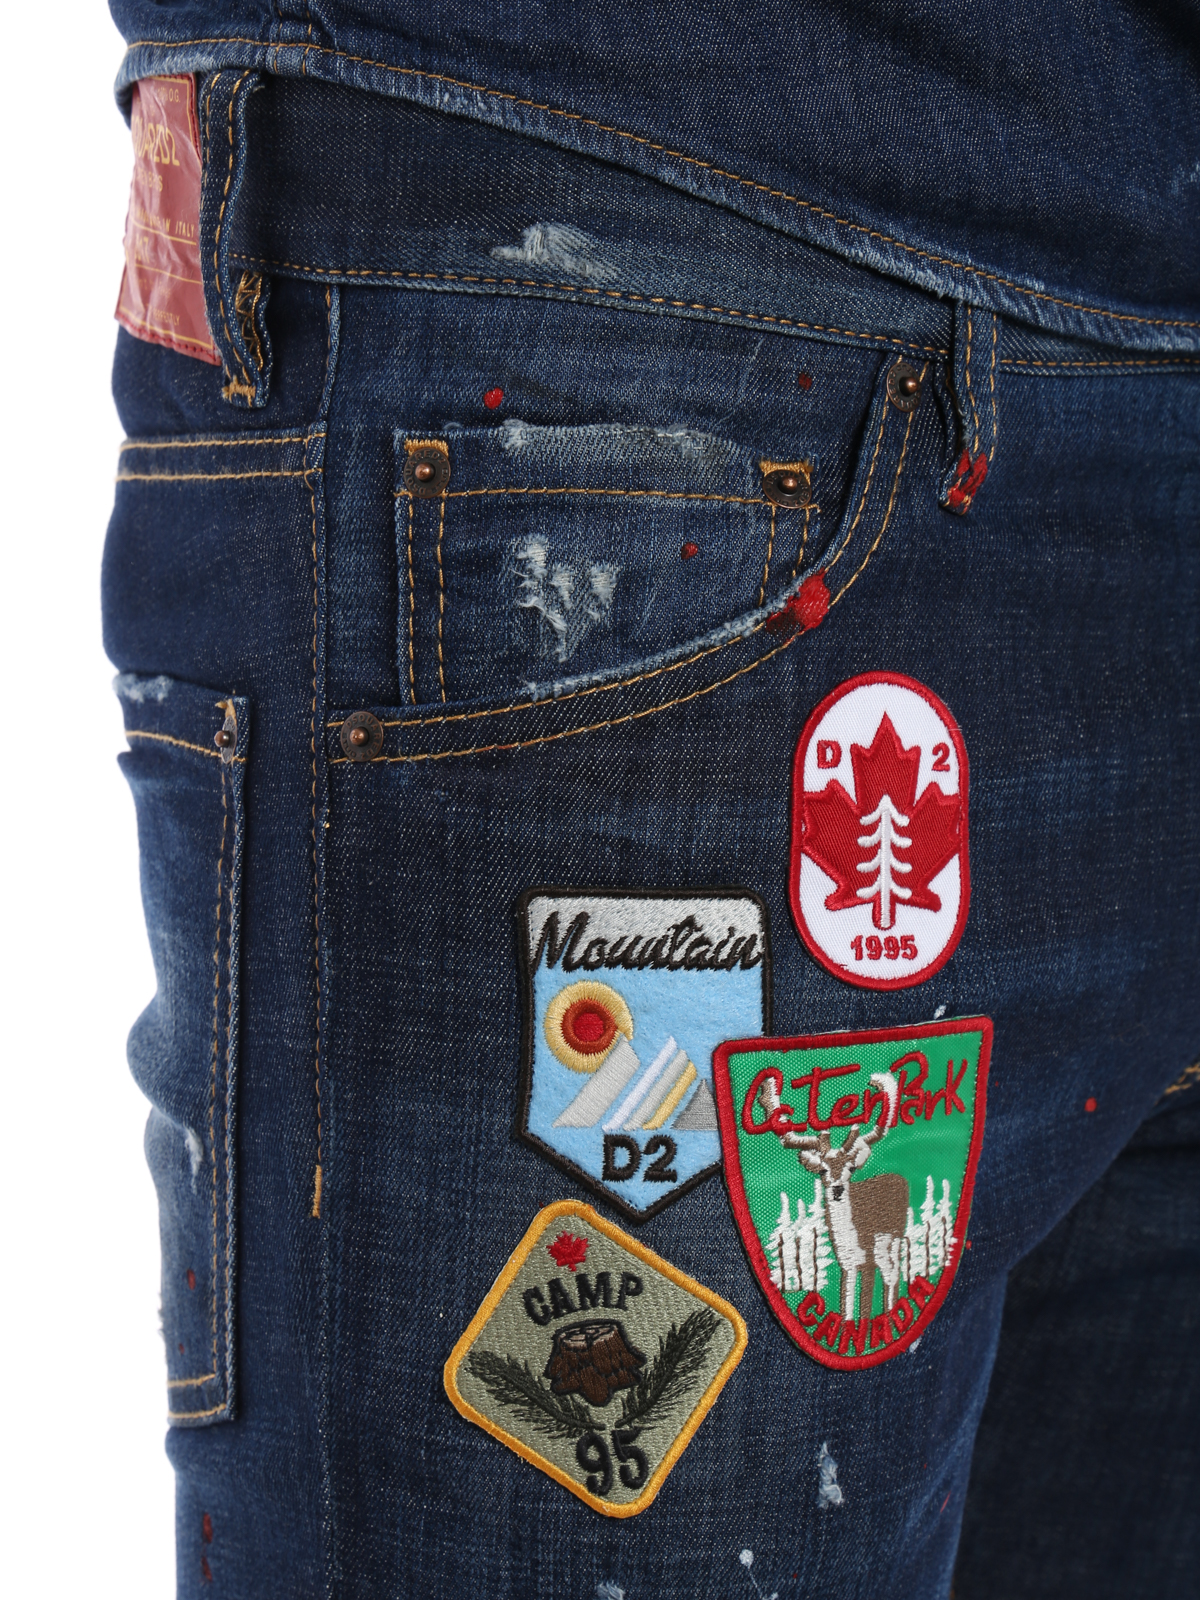 dsquared2 jeans with patches